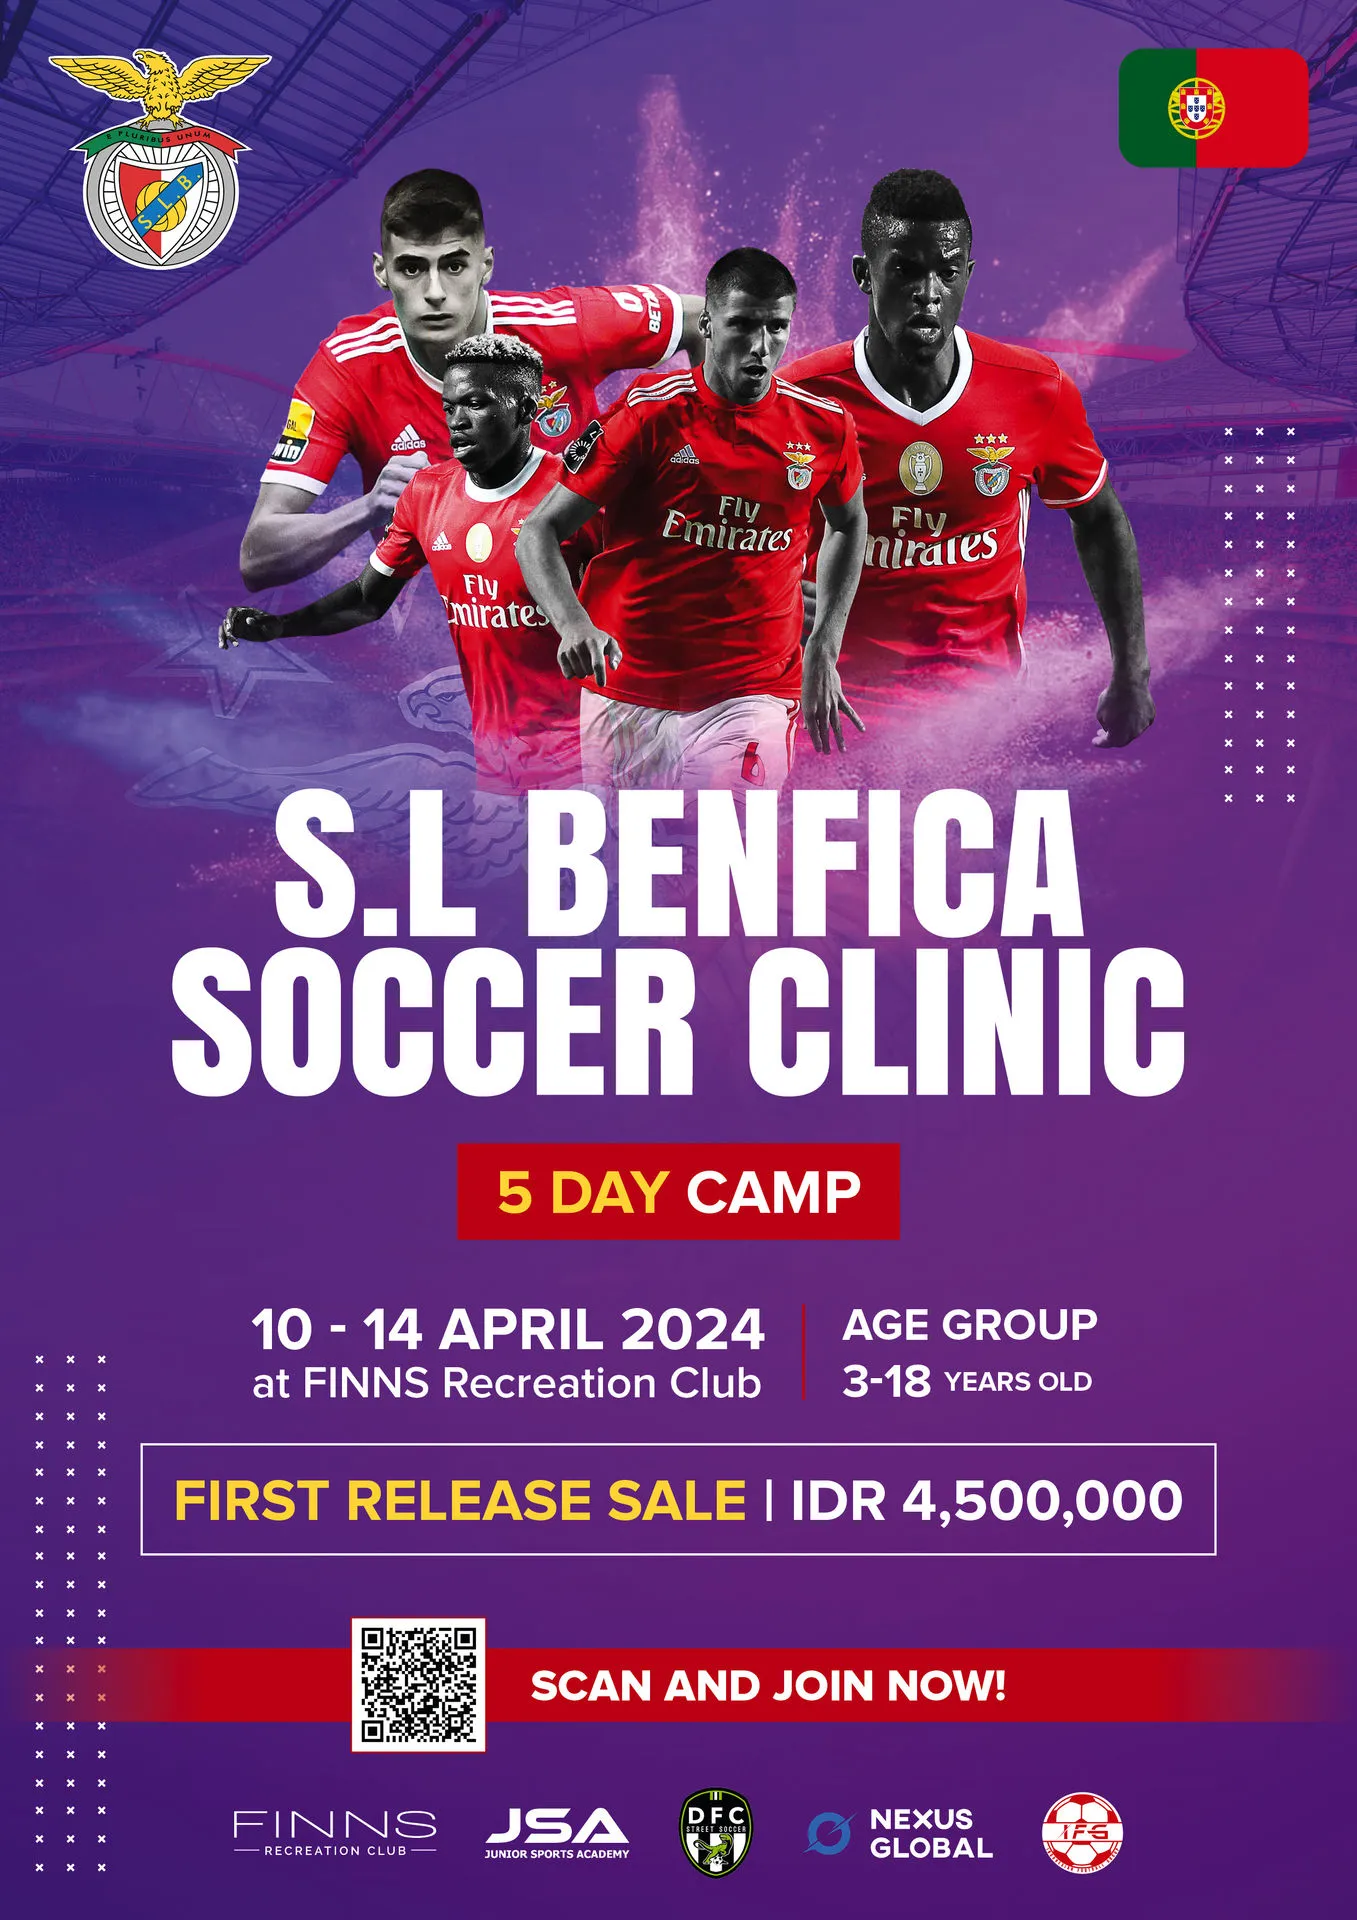 Family S.L Benfica Soccer Clinic 13467